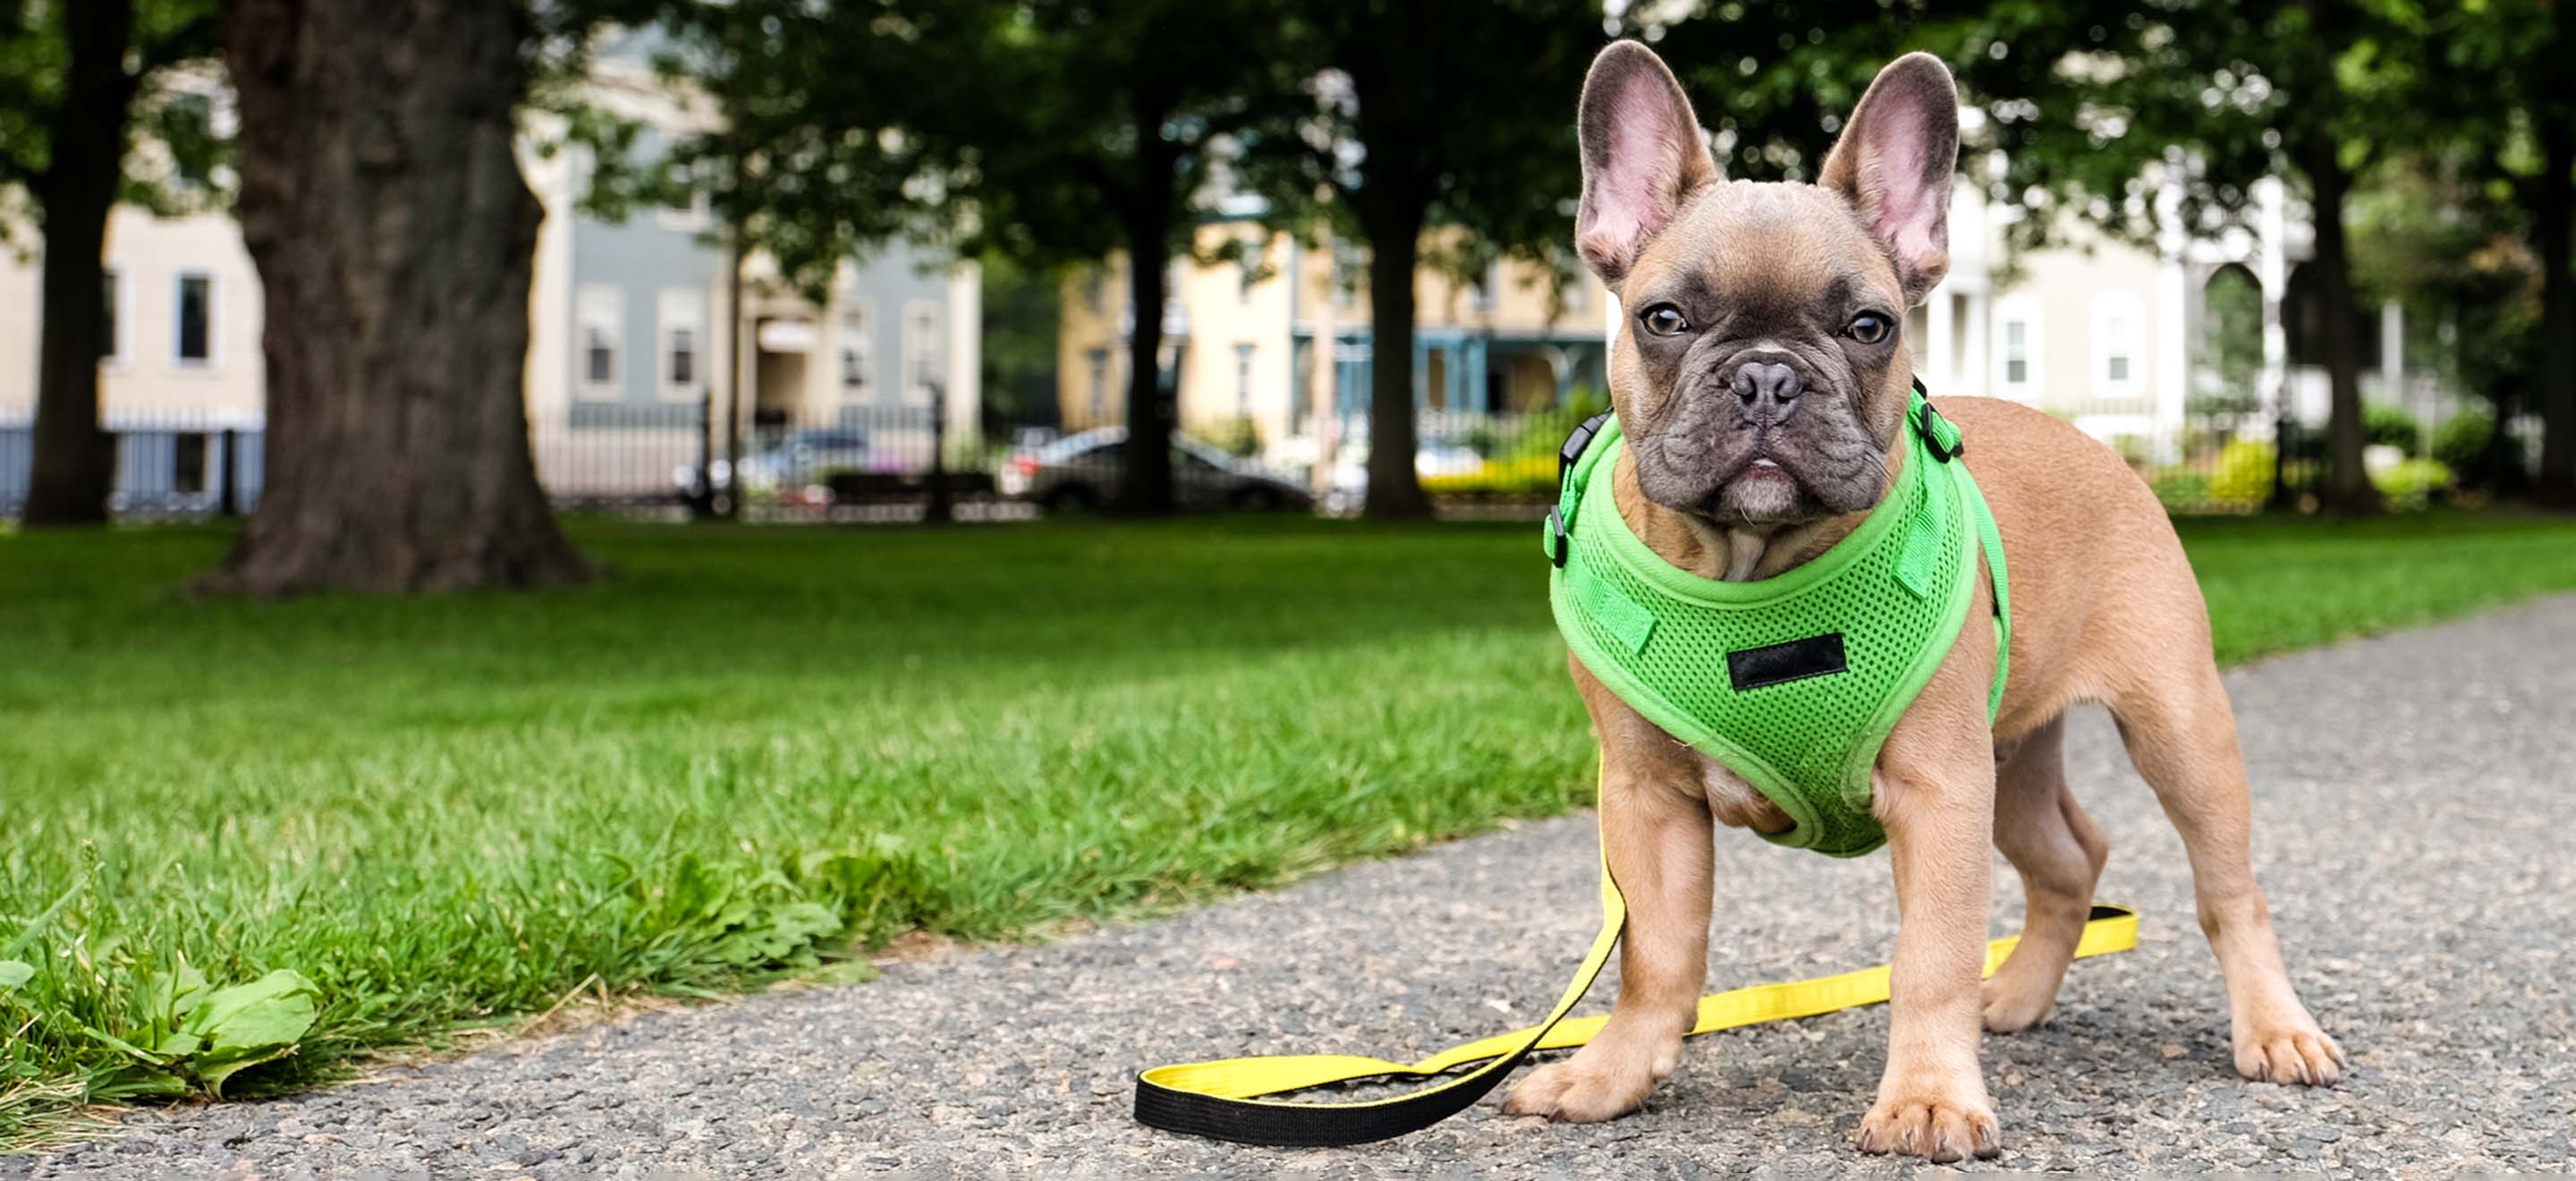 French Bulldog Puppies for Sale in Washington State - About Page —  Northwest Frenchies